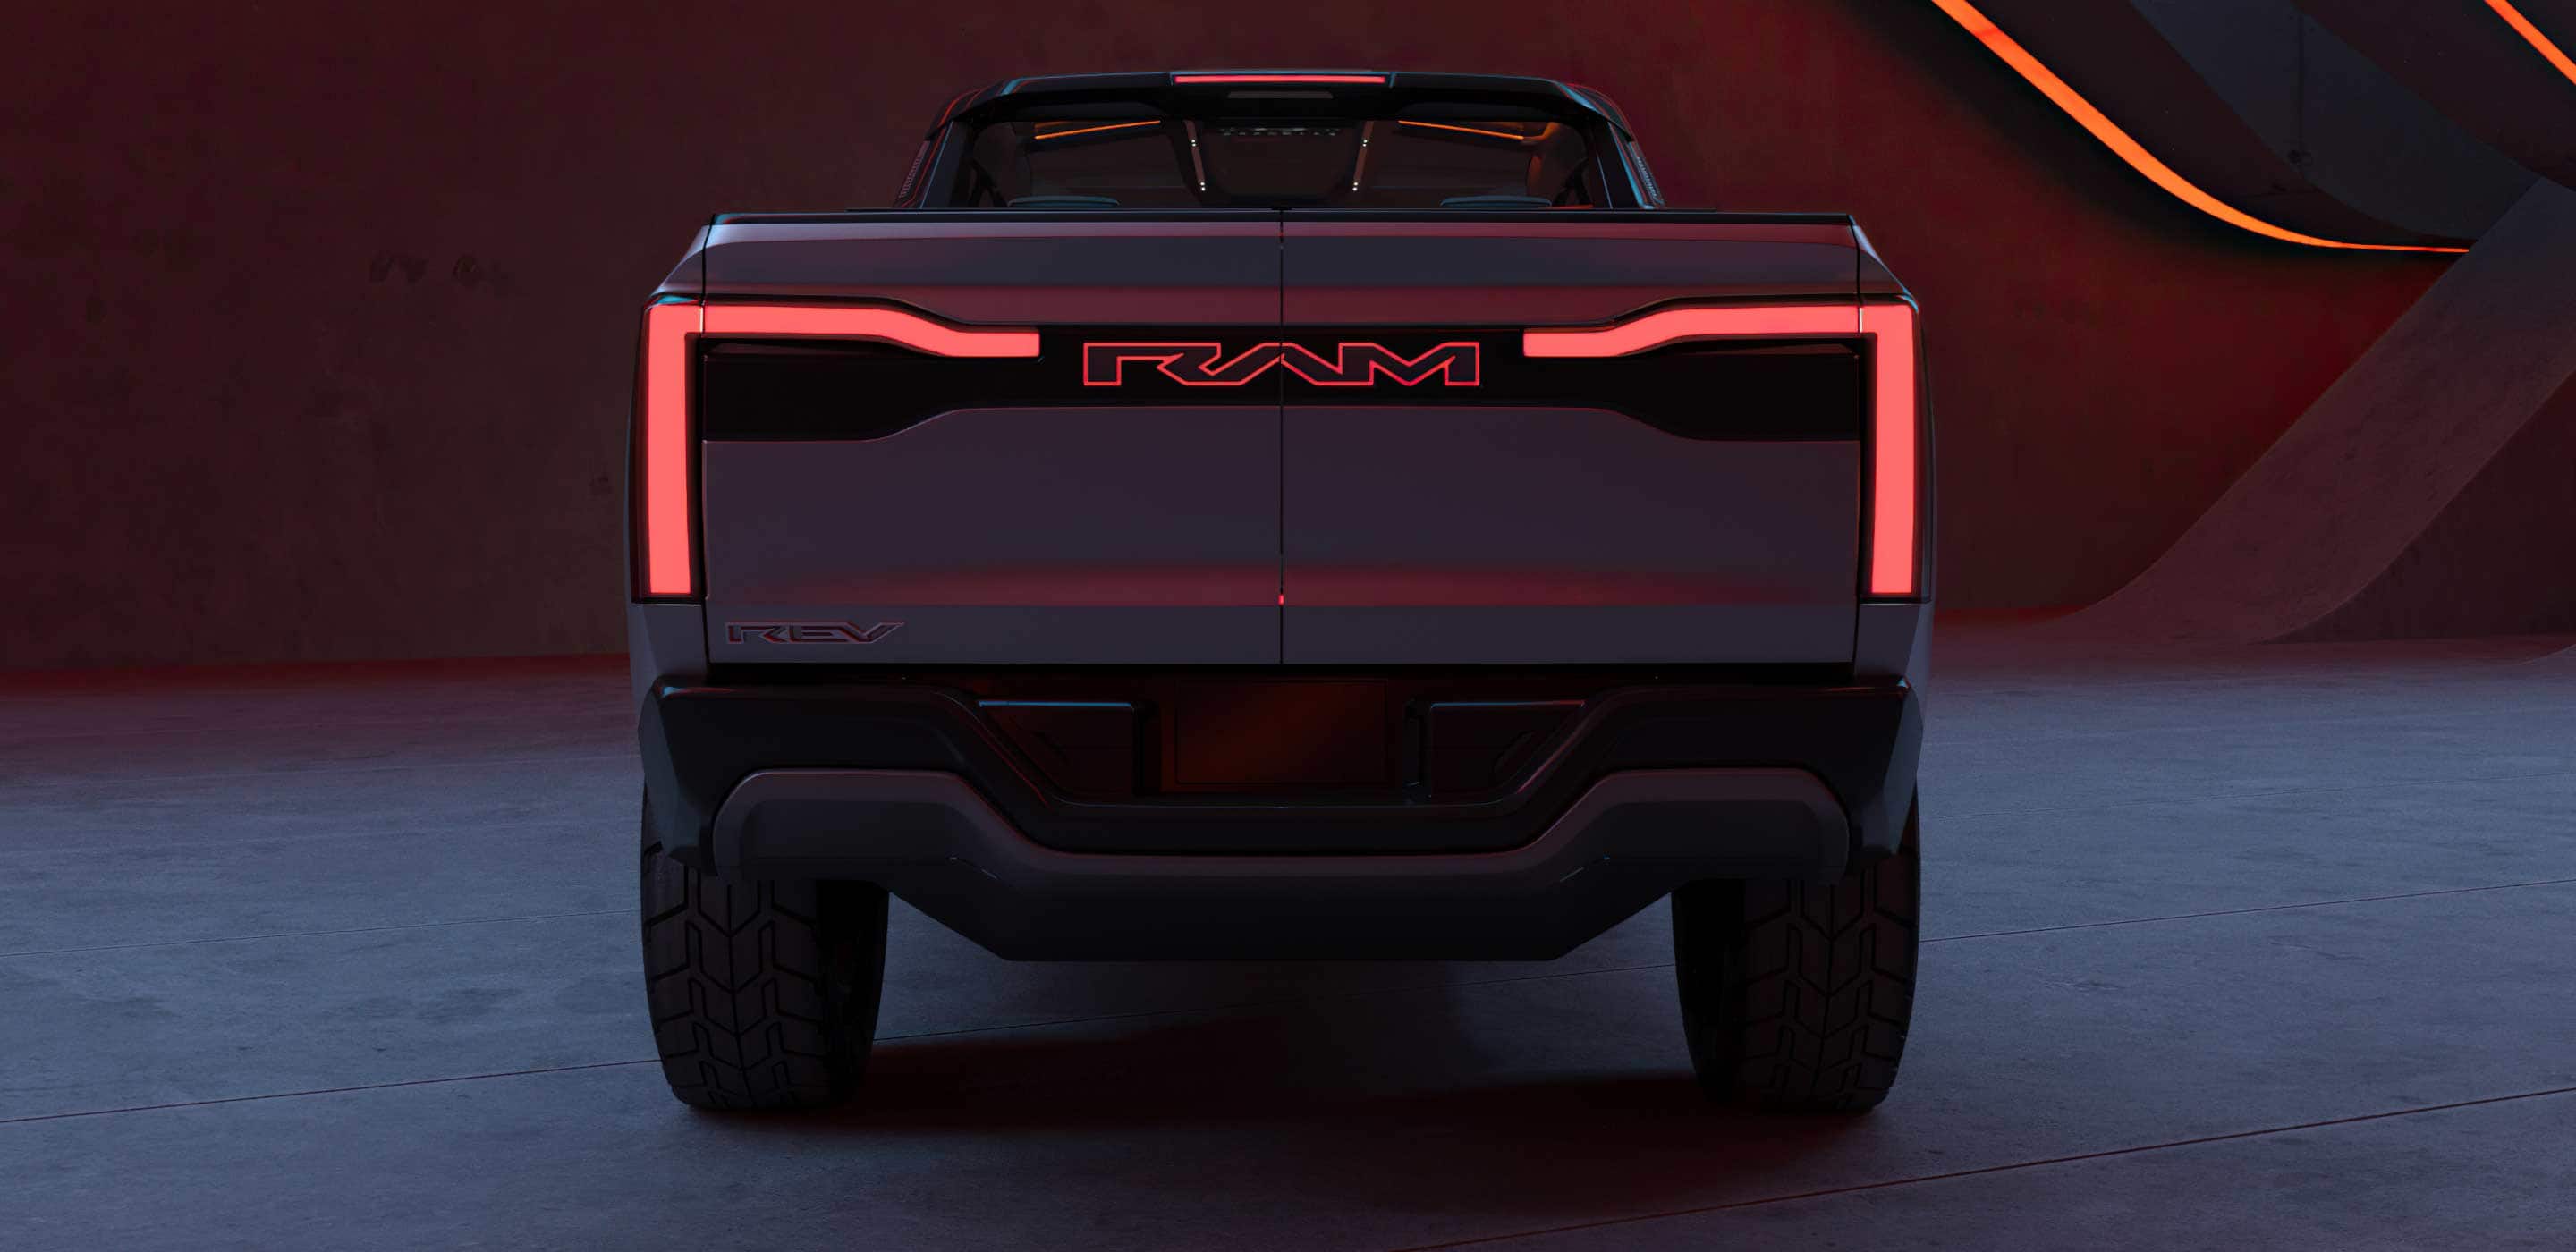 Display A rear view of the Ram Revolution Concept in a studio with a dramatic set design and lighting.